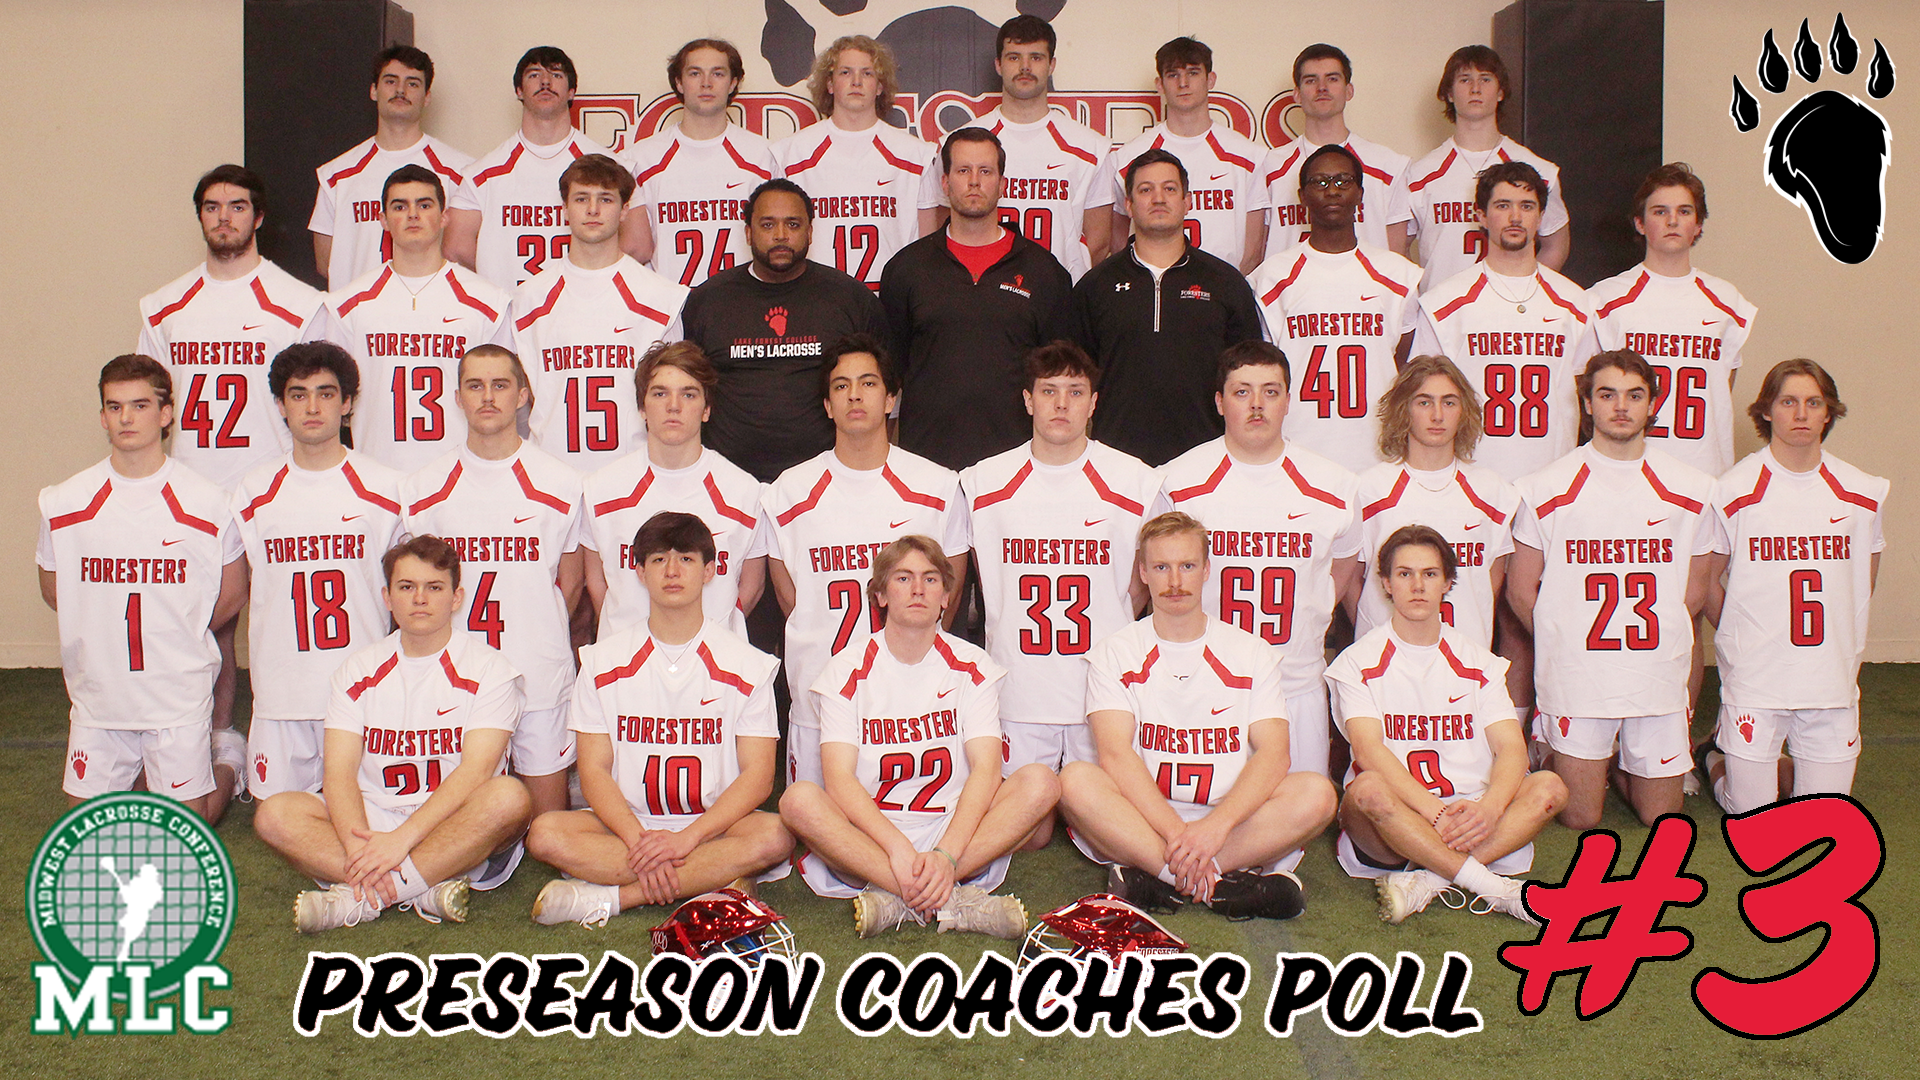 Foresters Listed Third in MLC Preseason Coaches Poll